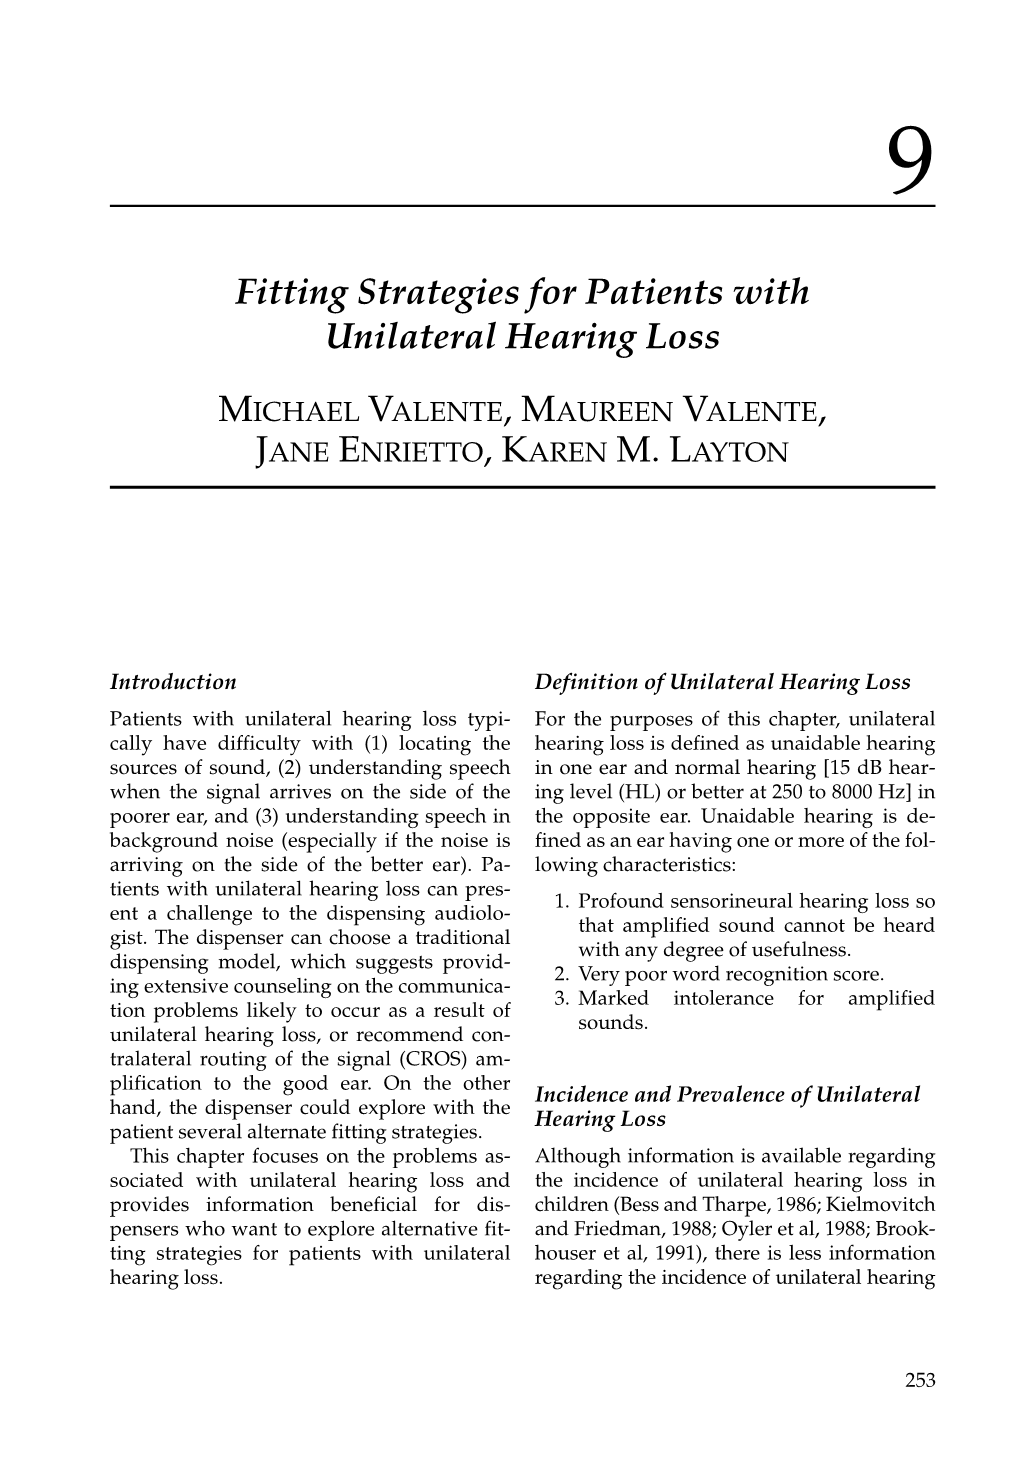 Fitting Strategies for Patients with Unilateral Hearing Loss